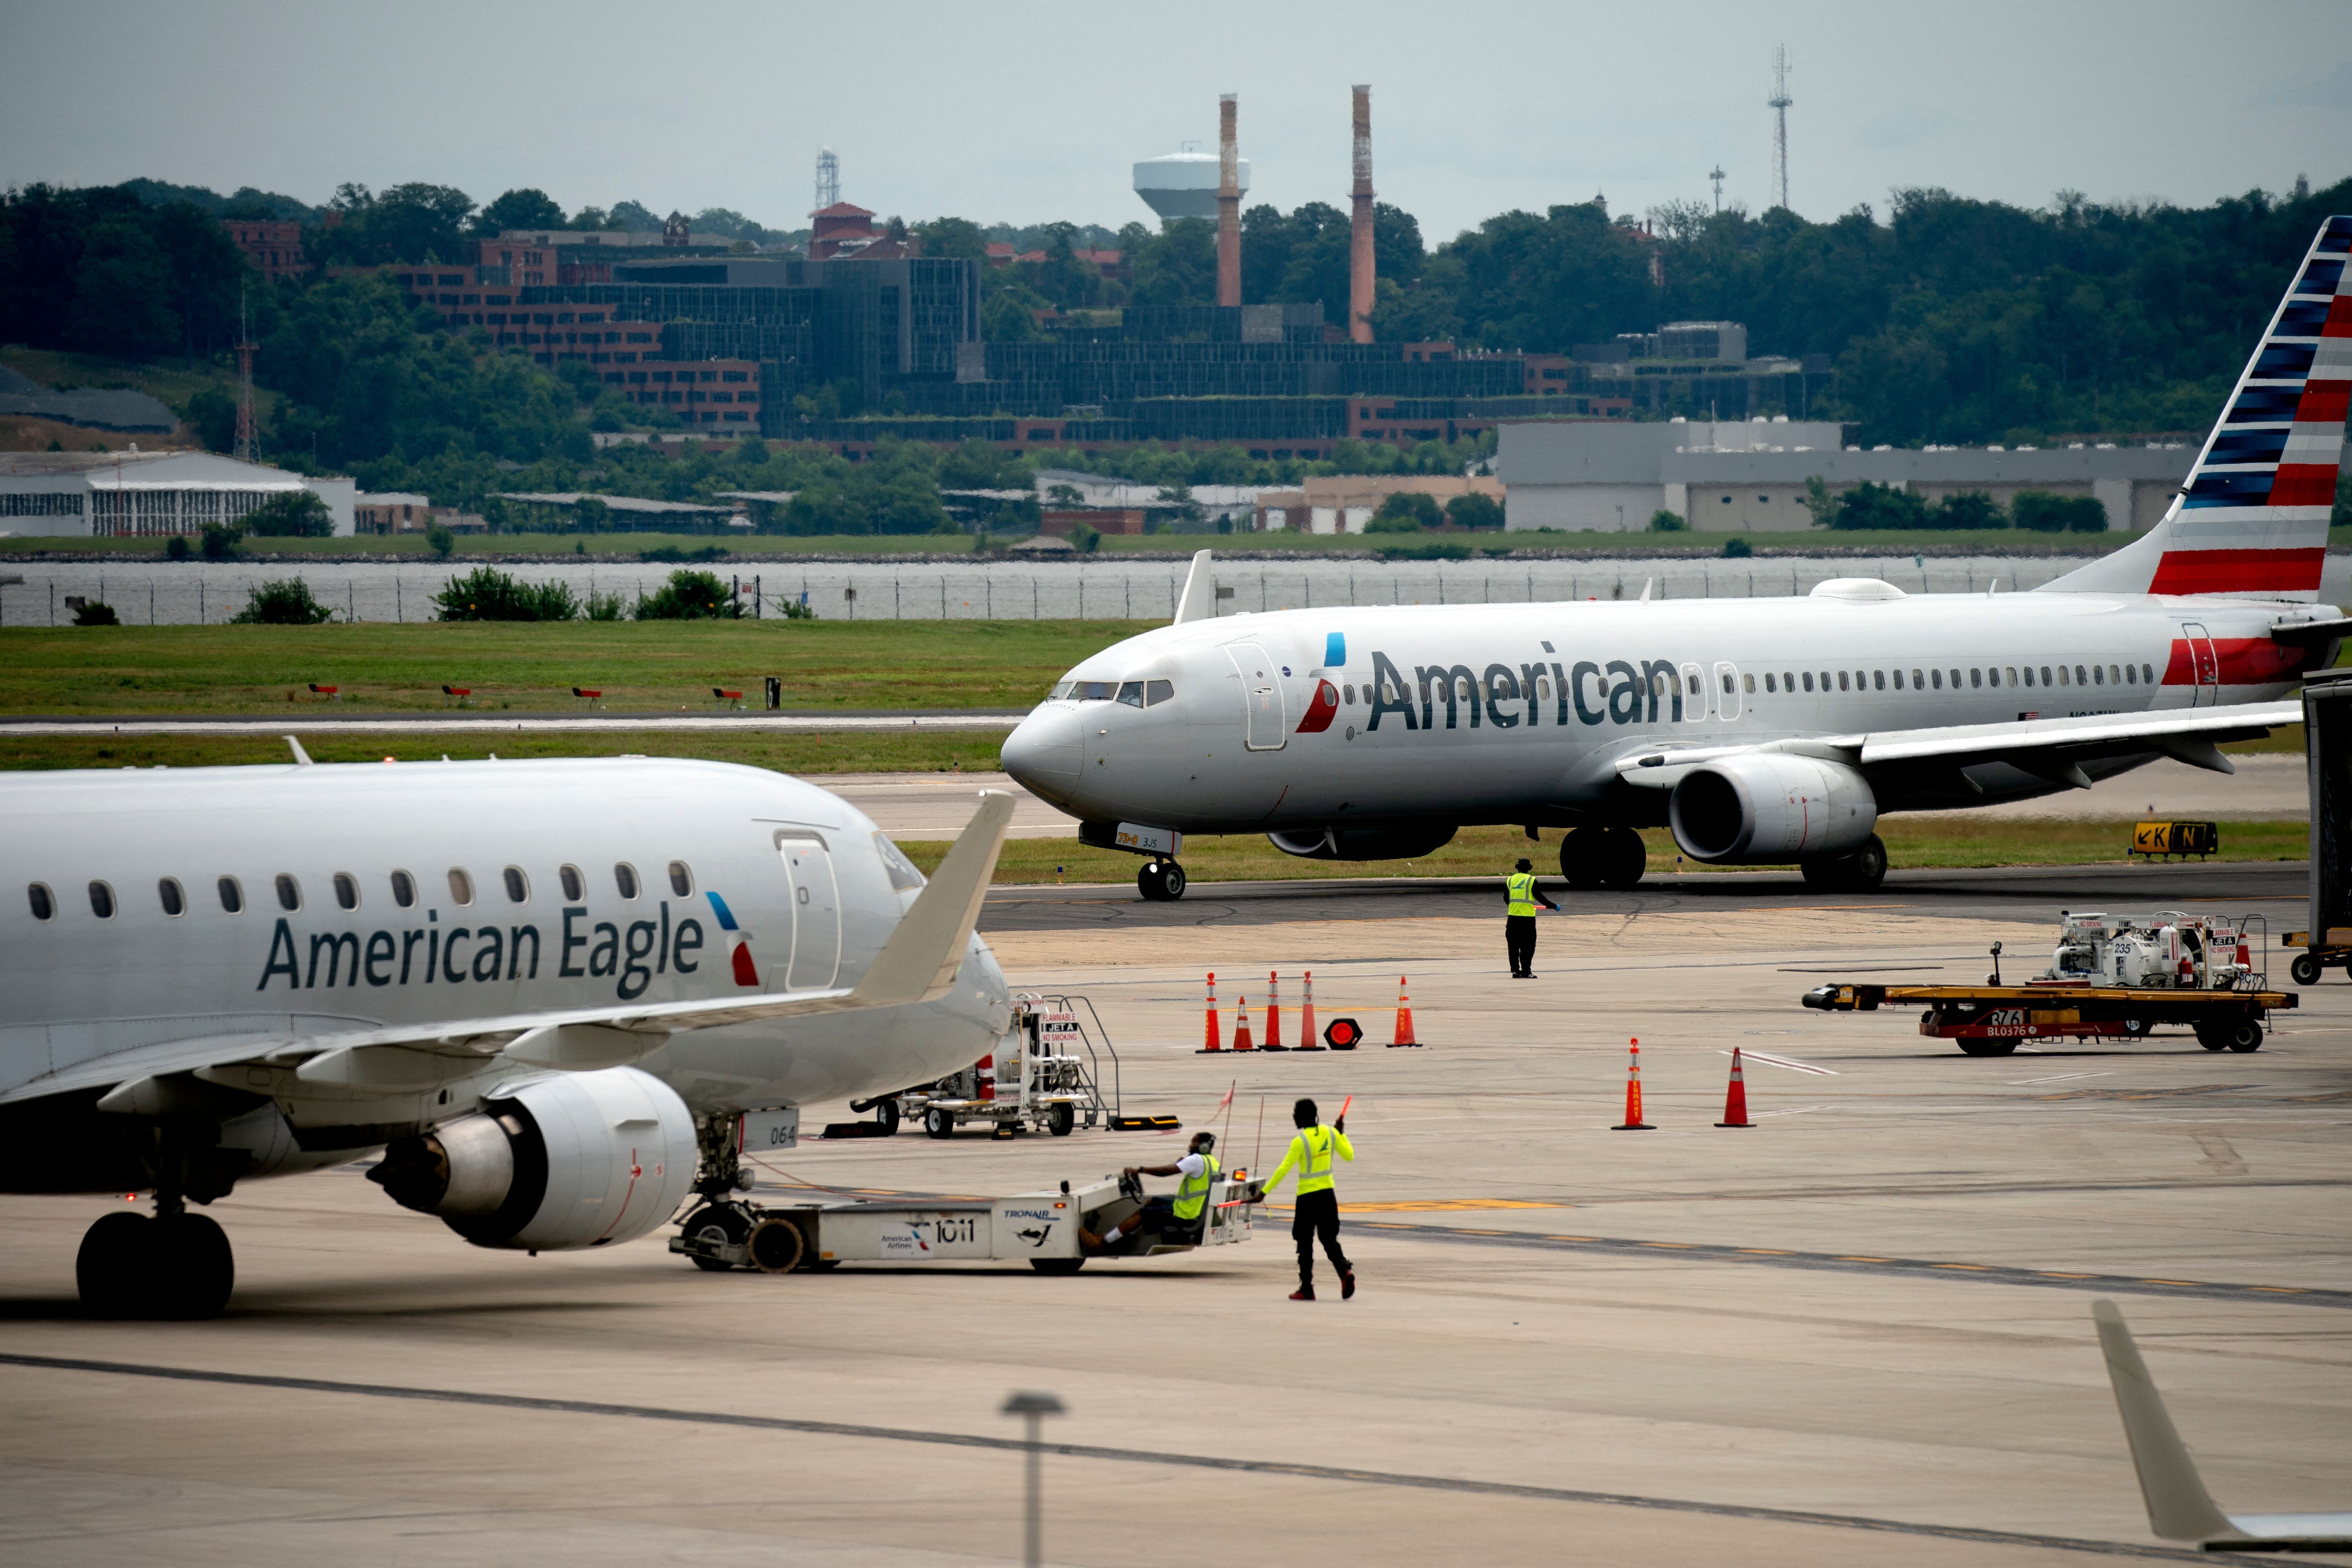 American Airlines and American Eagle planes on tarmac